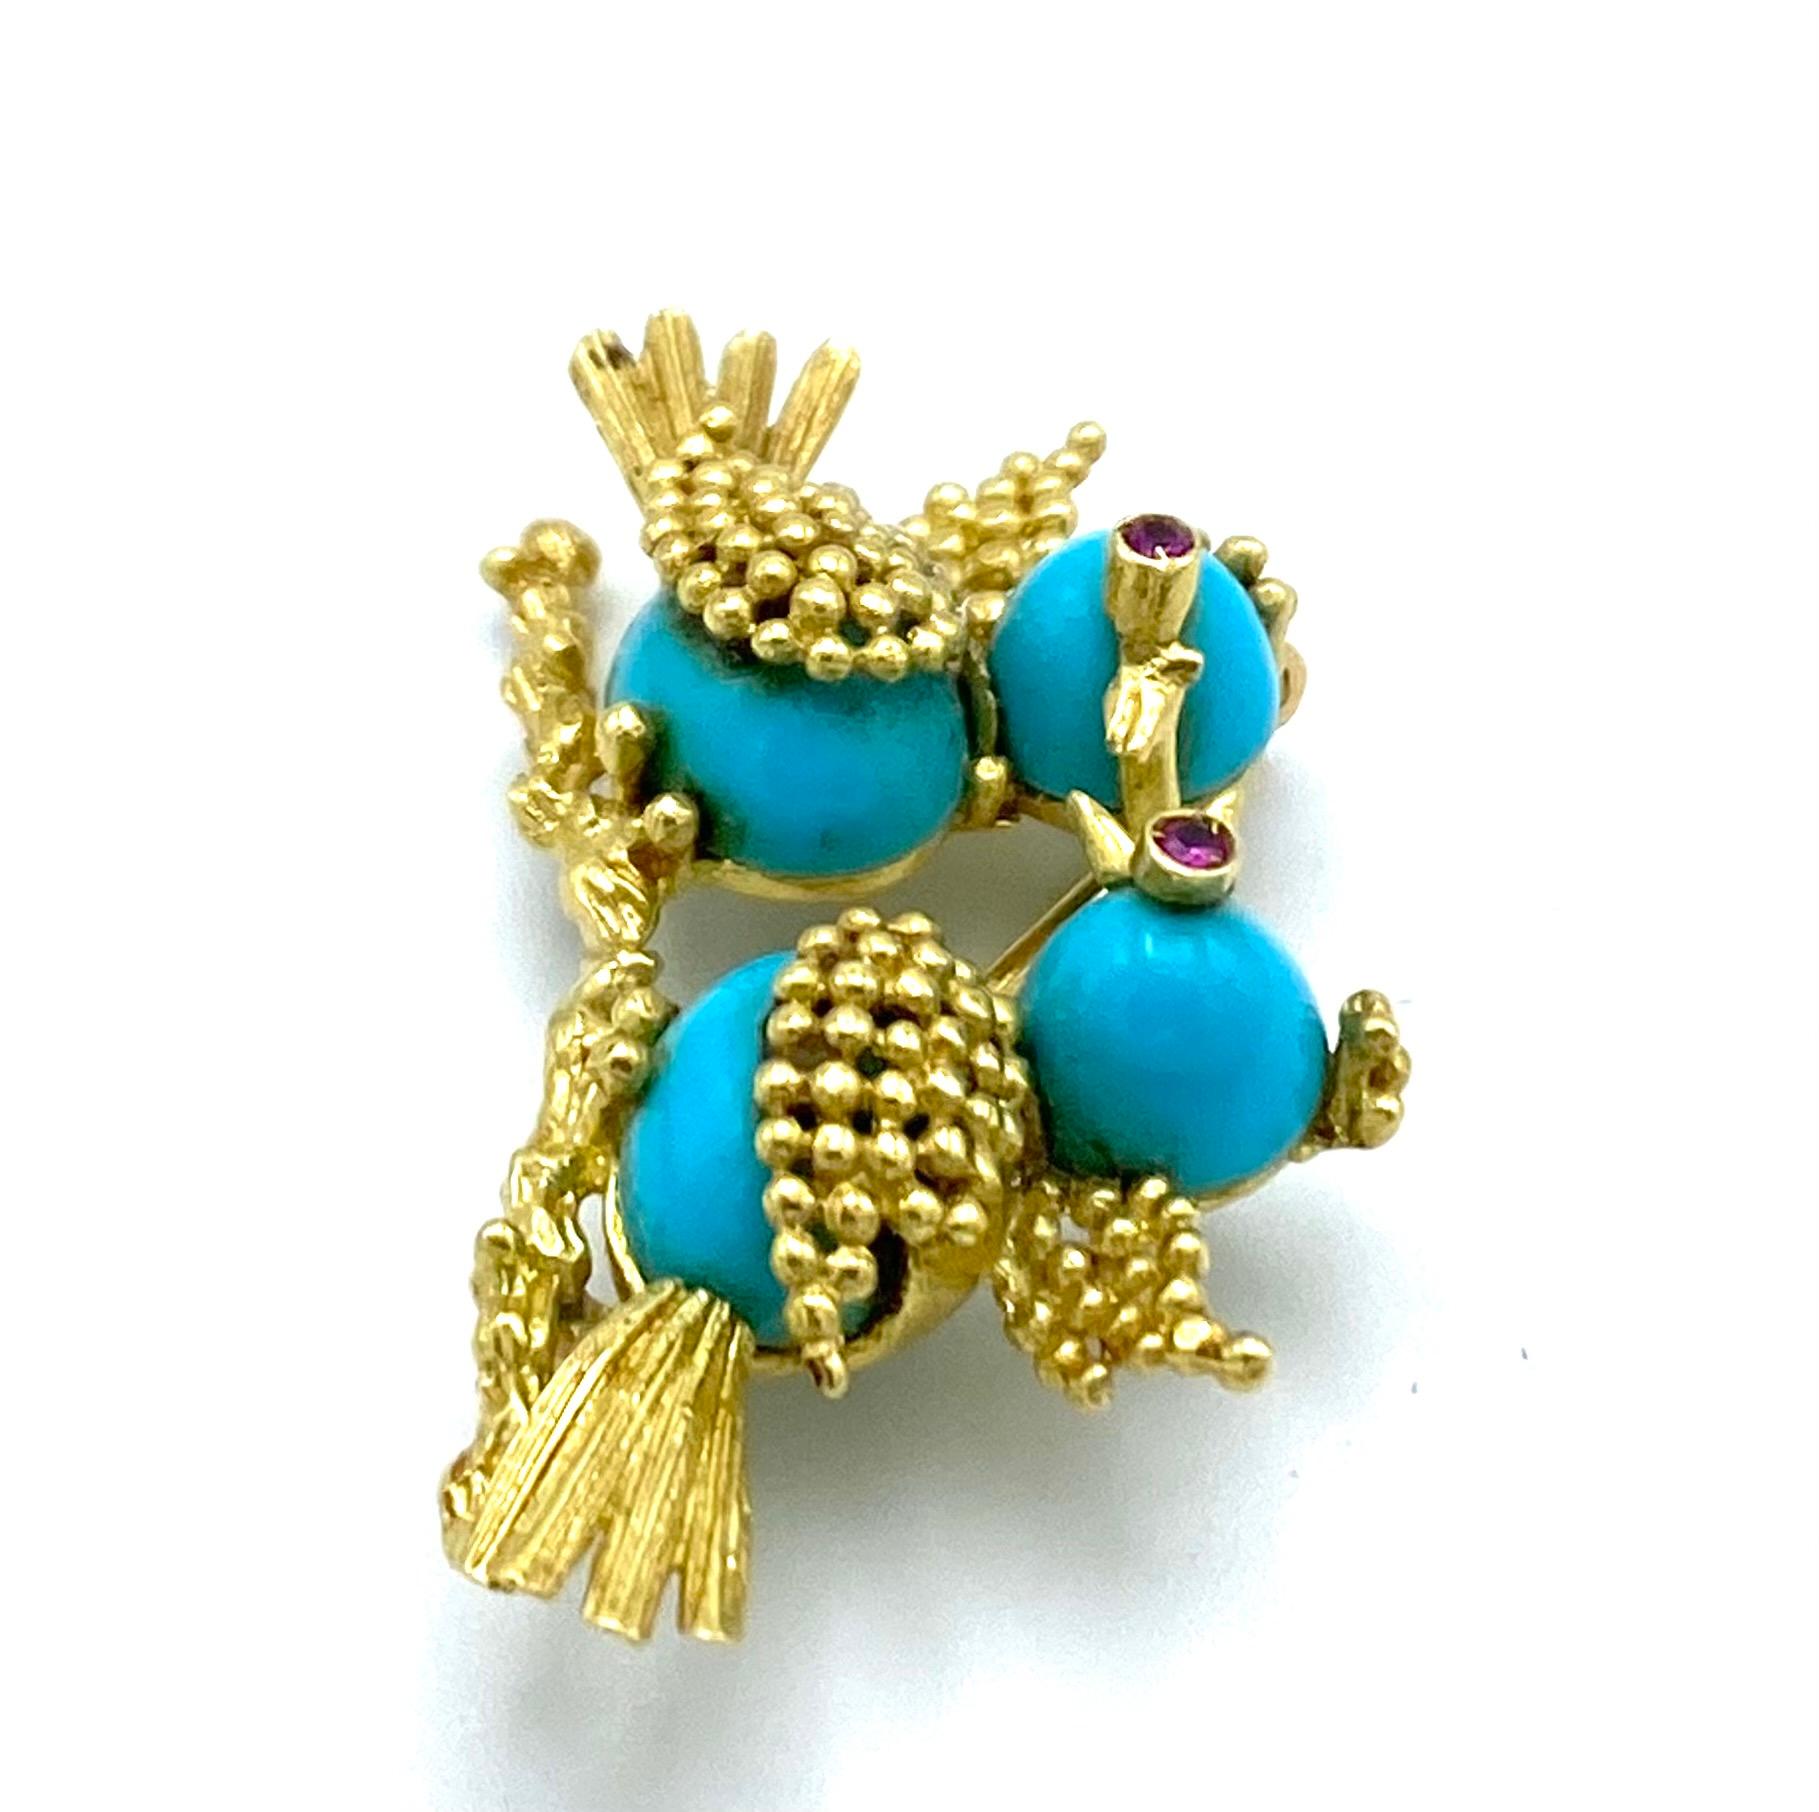 Product details:

The brooch is made out of 14 karat yellow gold, turquoise and detailed with ruby as birds eyes. It is featuring love birds on the branch.